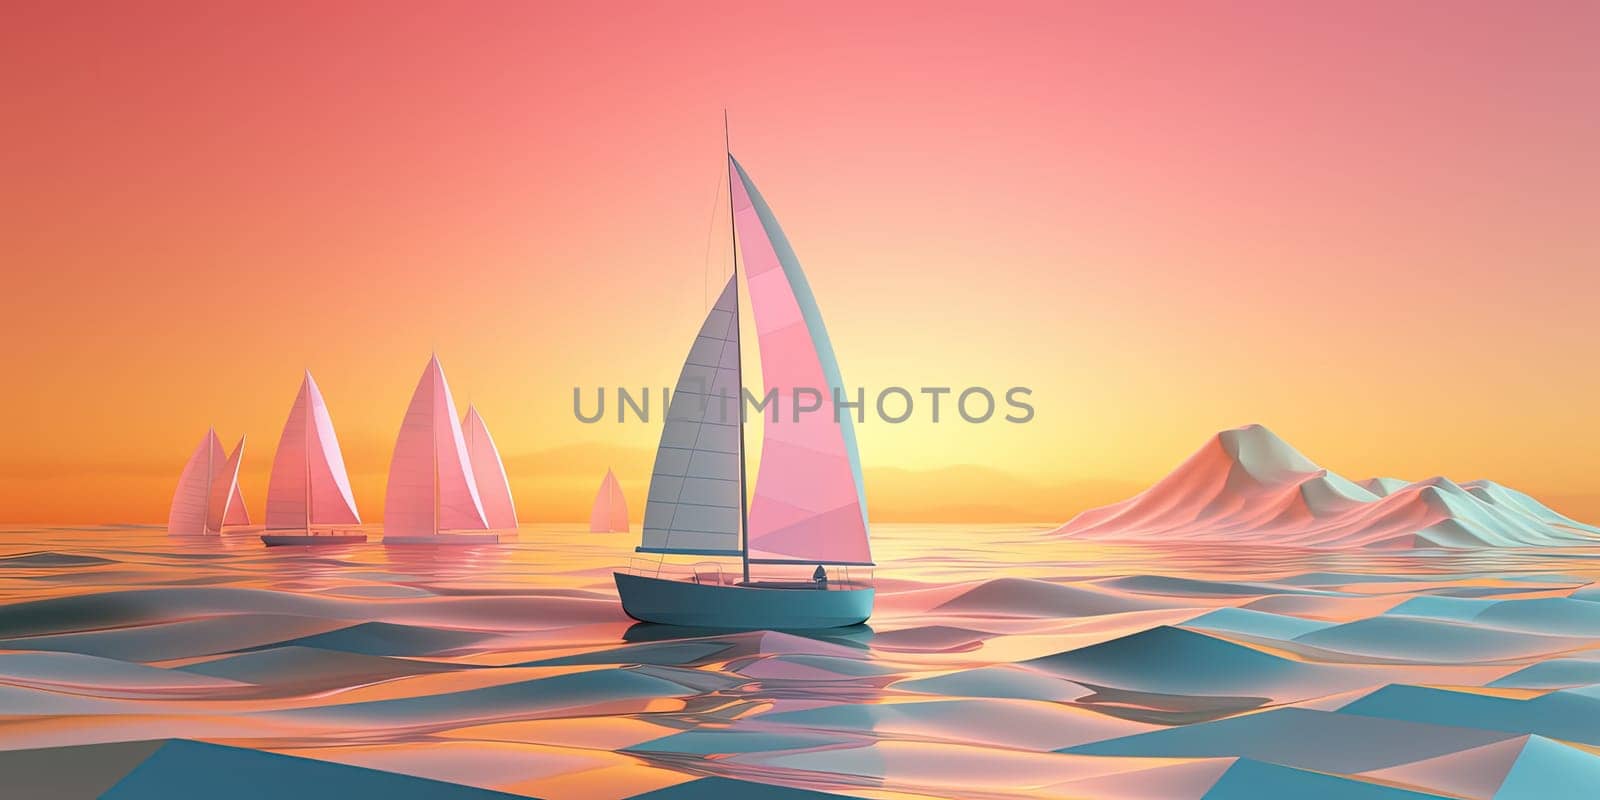 Amazing landscape with a solitary yacht at sea during a polygonal illustrated sunset